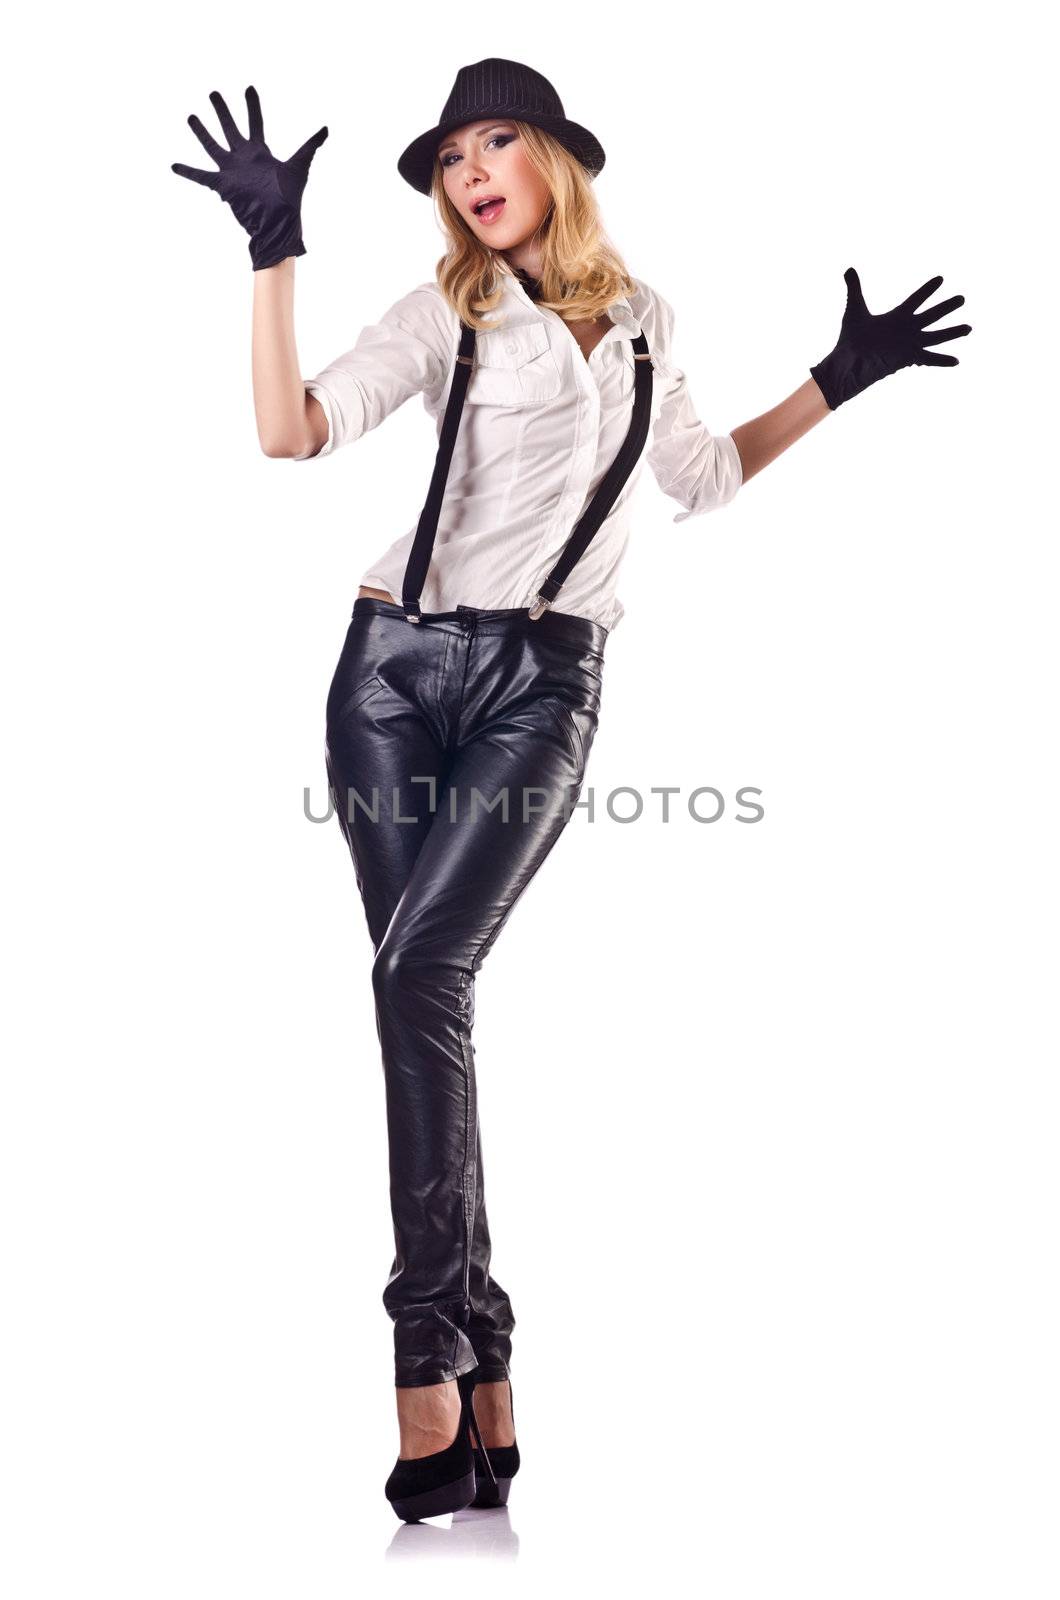 Attractive woman dancing in leather suit